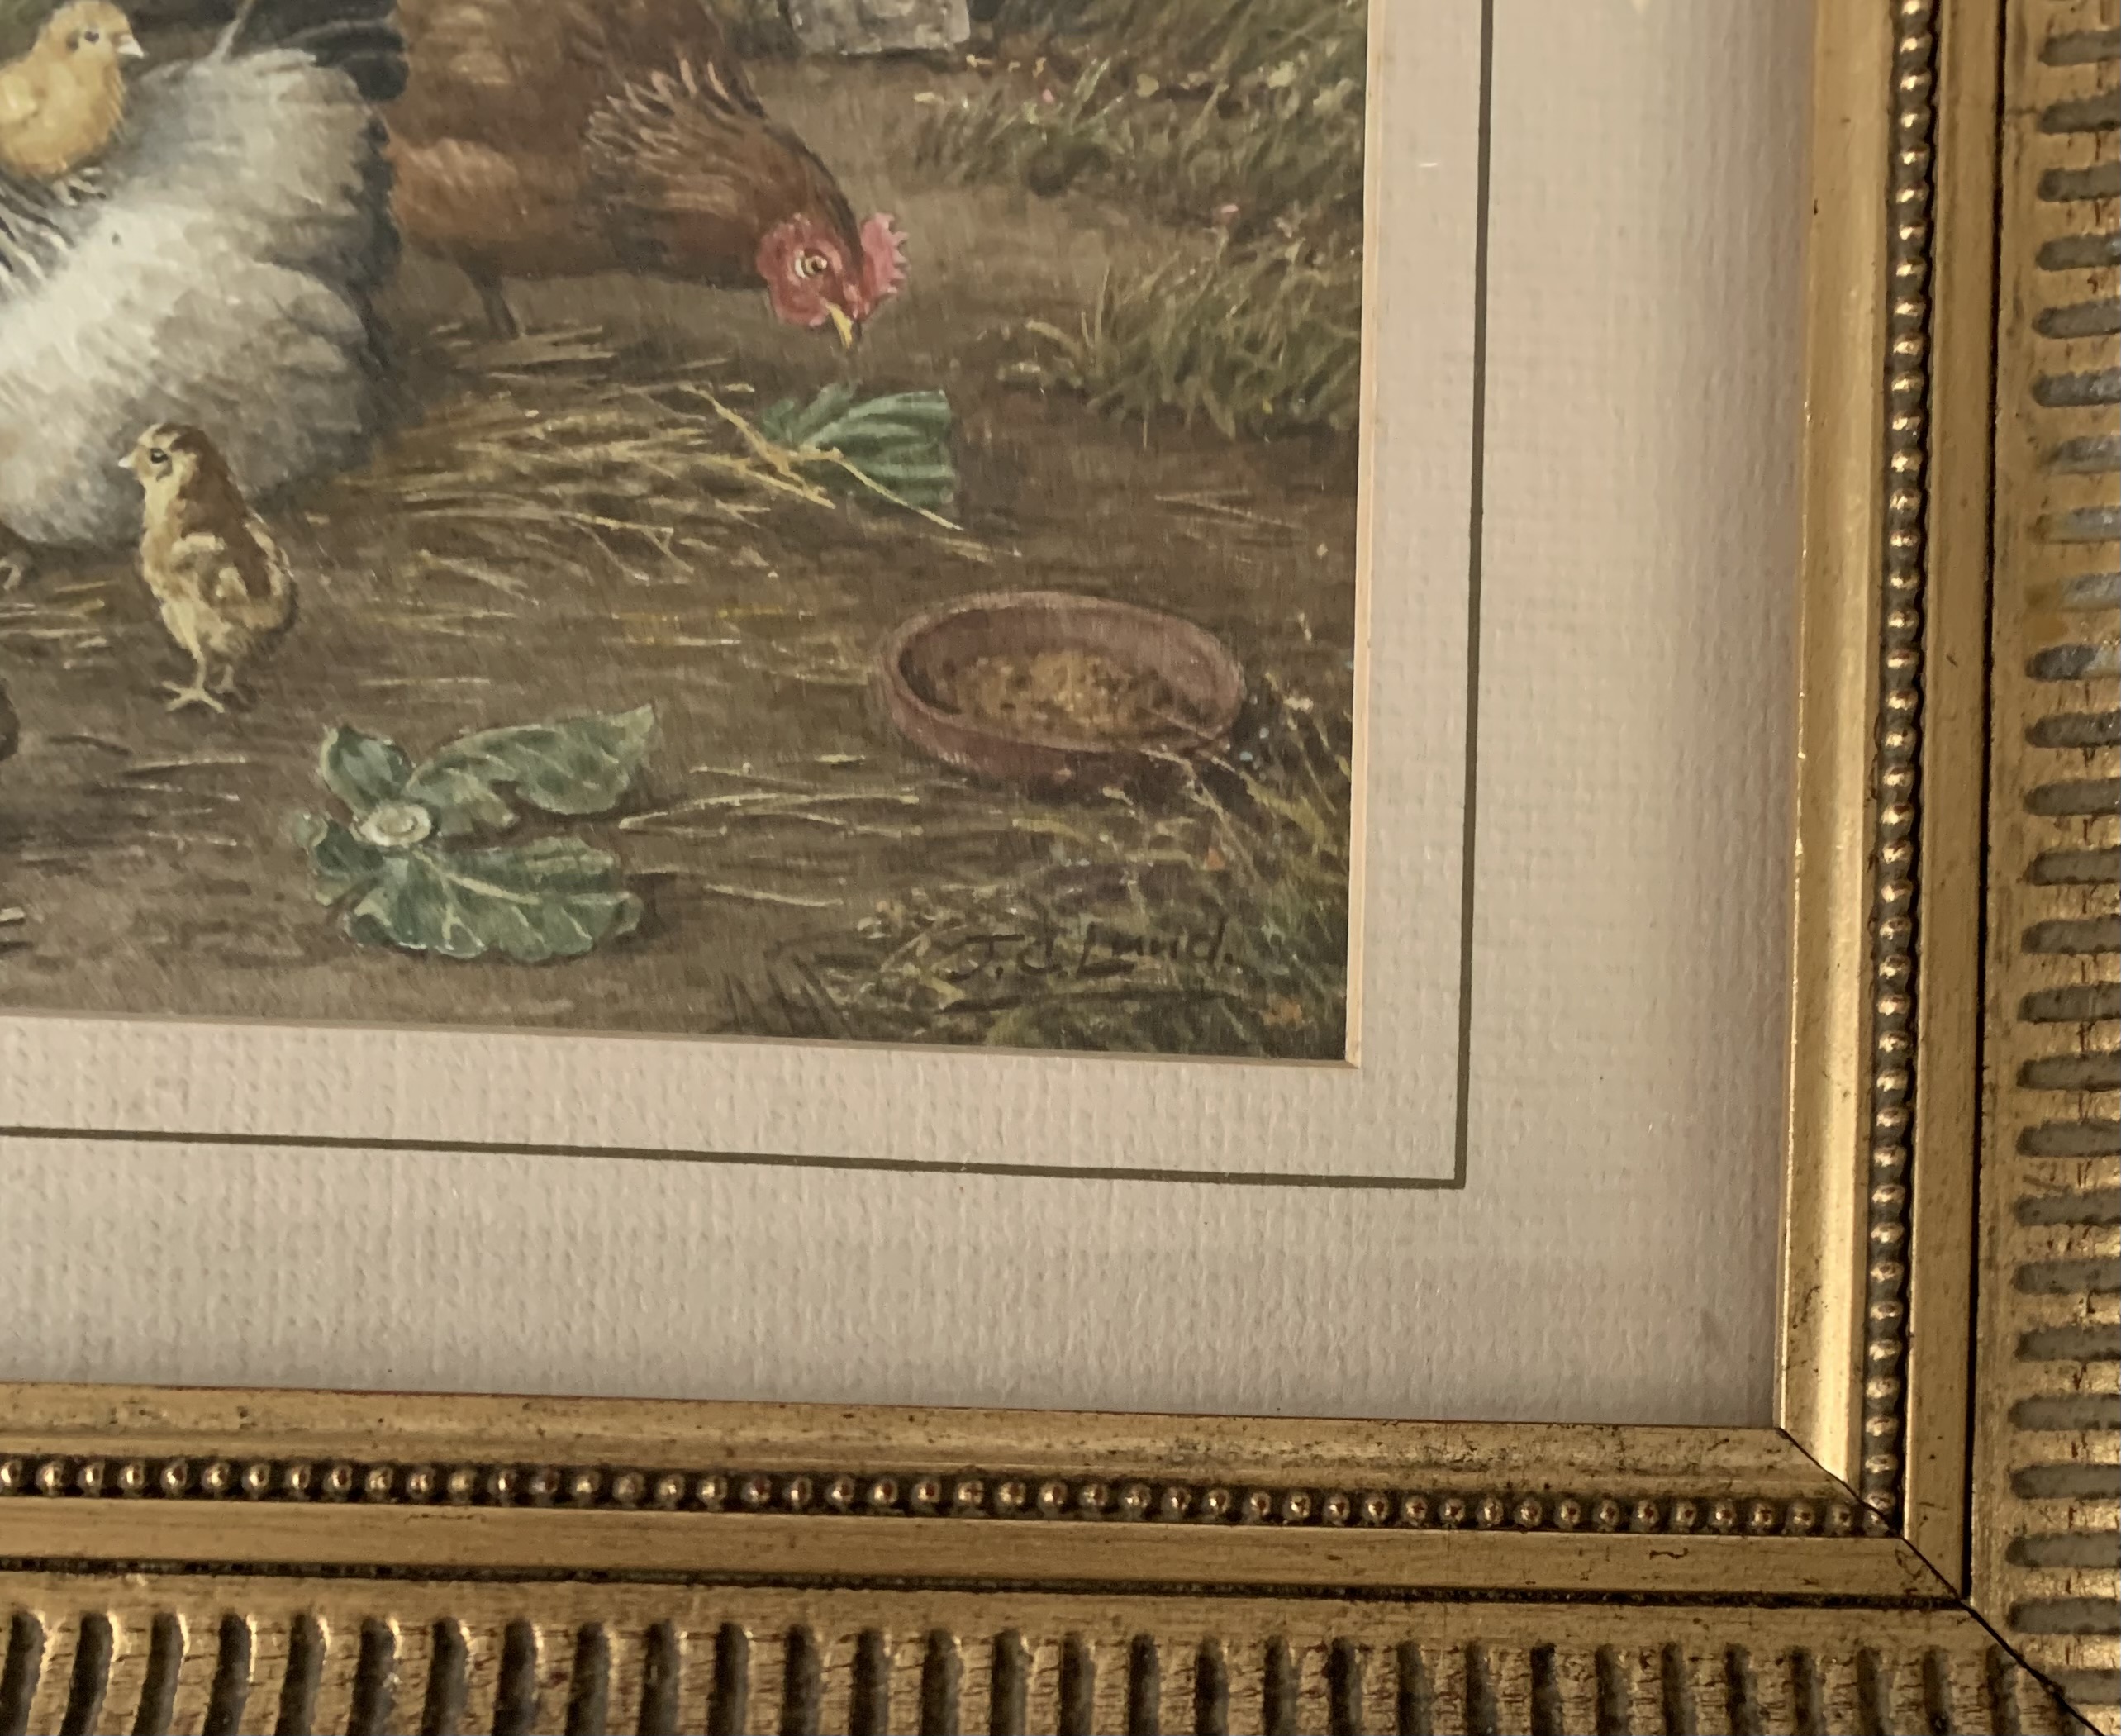 Watercolour of chickens signed by J.C.Lund. image 10.5” x 8.5”, frame 18” x 15.5” - Image 2 of 3